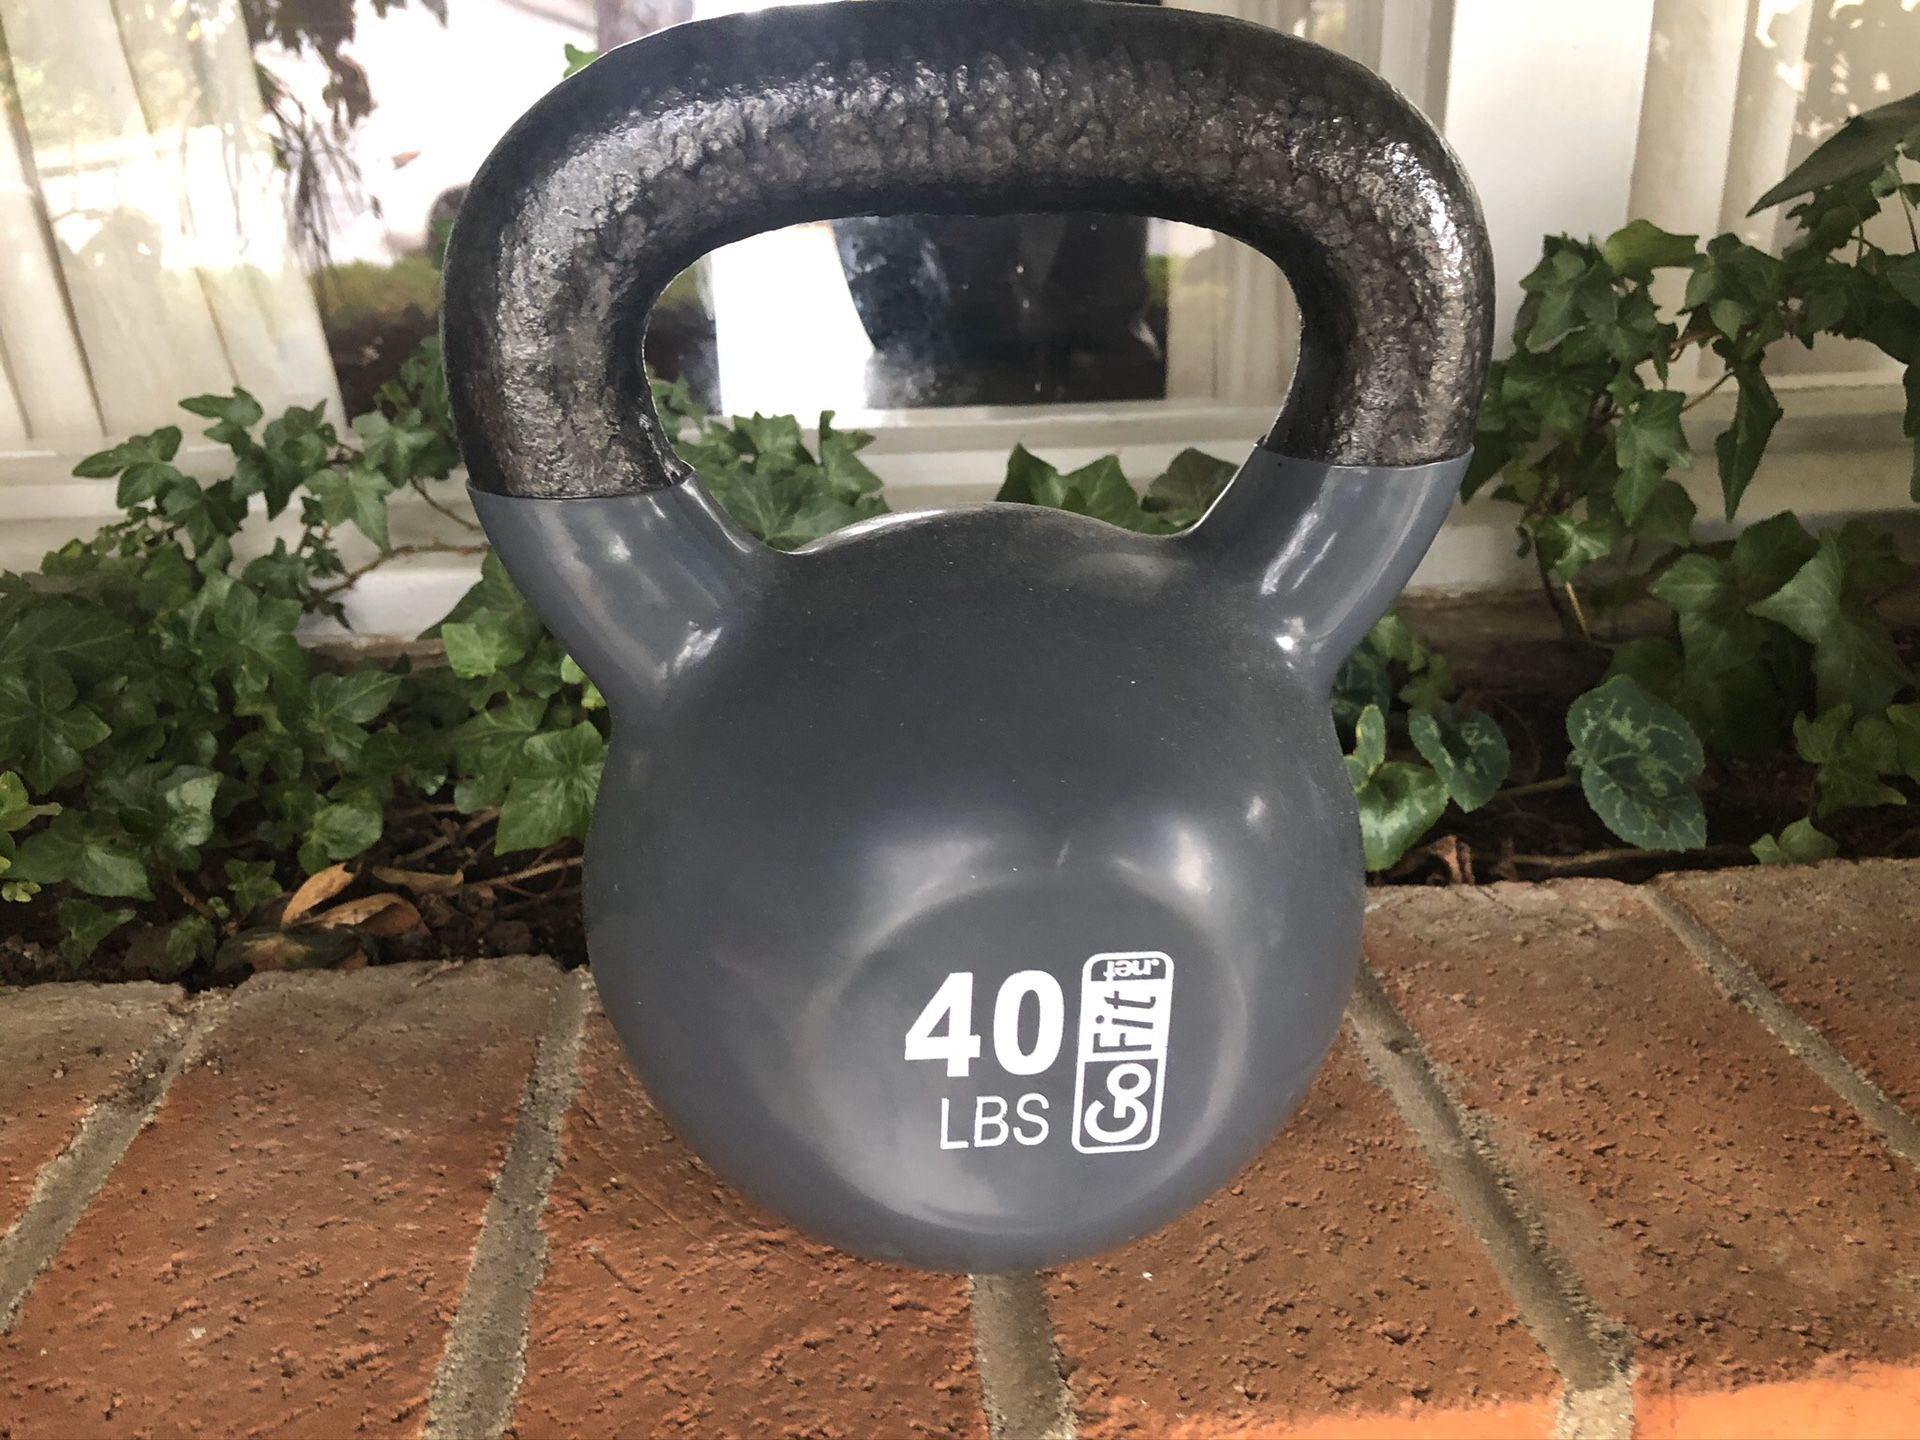 40 lbs kettle ball in excellent condition.